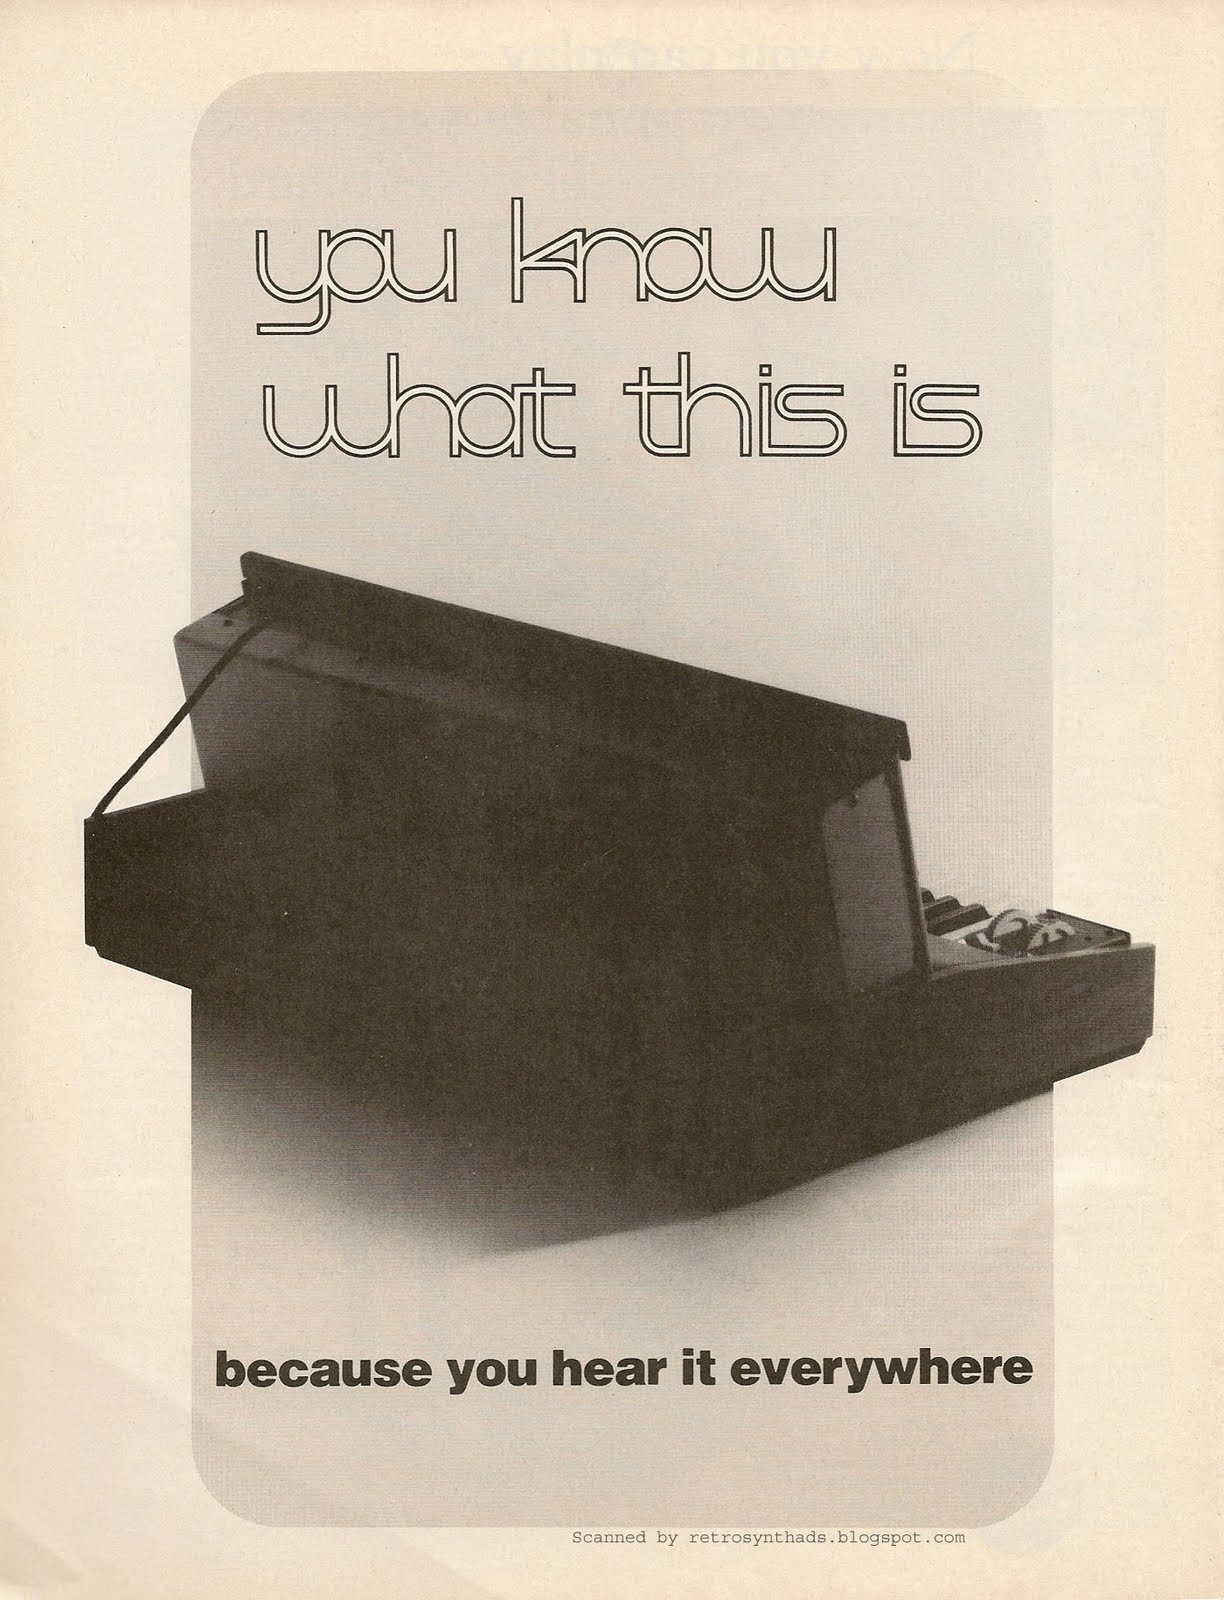 http://retrosynthads.blogspot.ca/2012/10/moog-minimoog-you-know-what-this-is.html